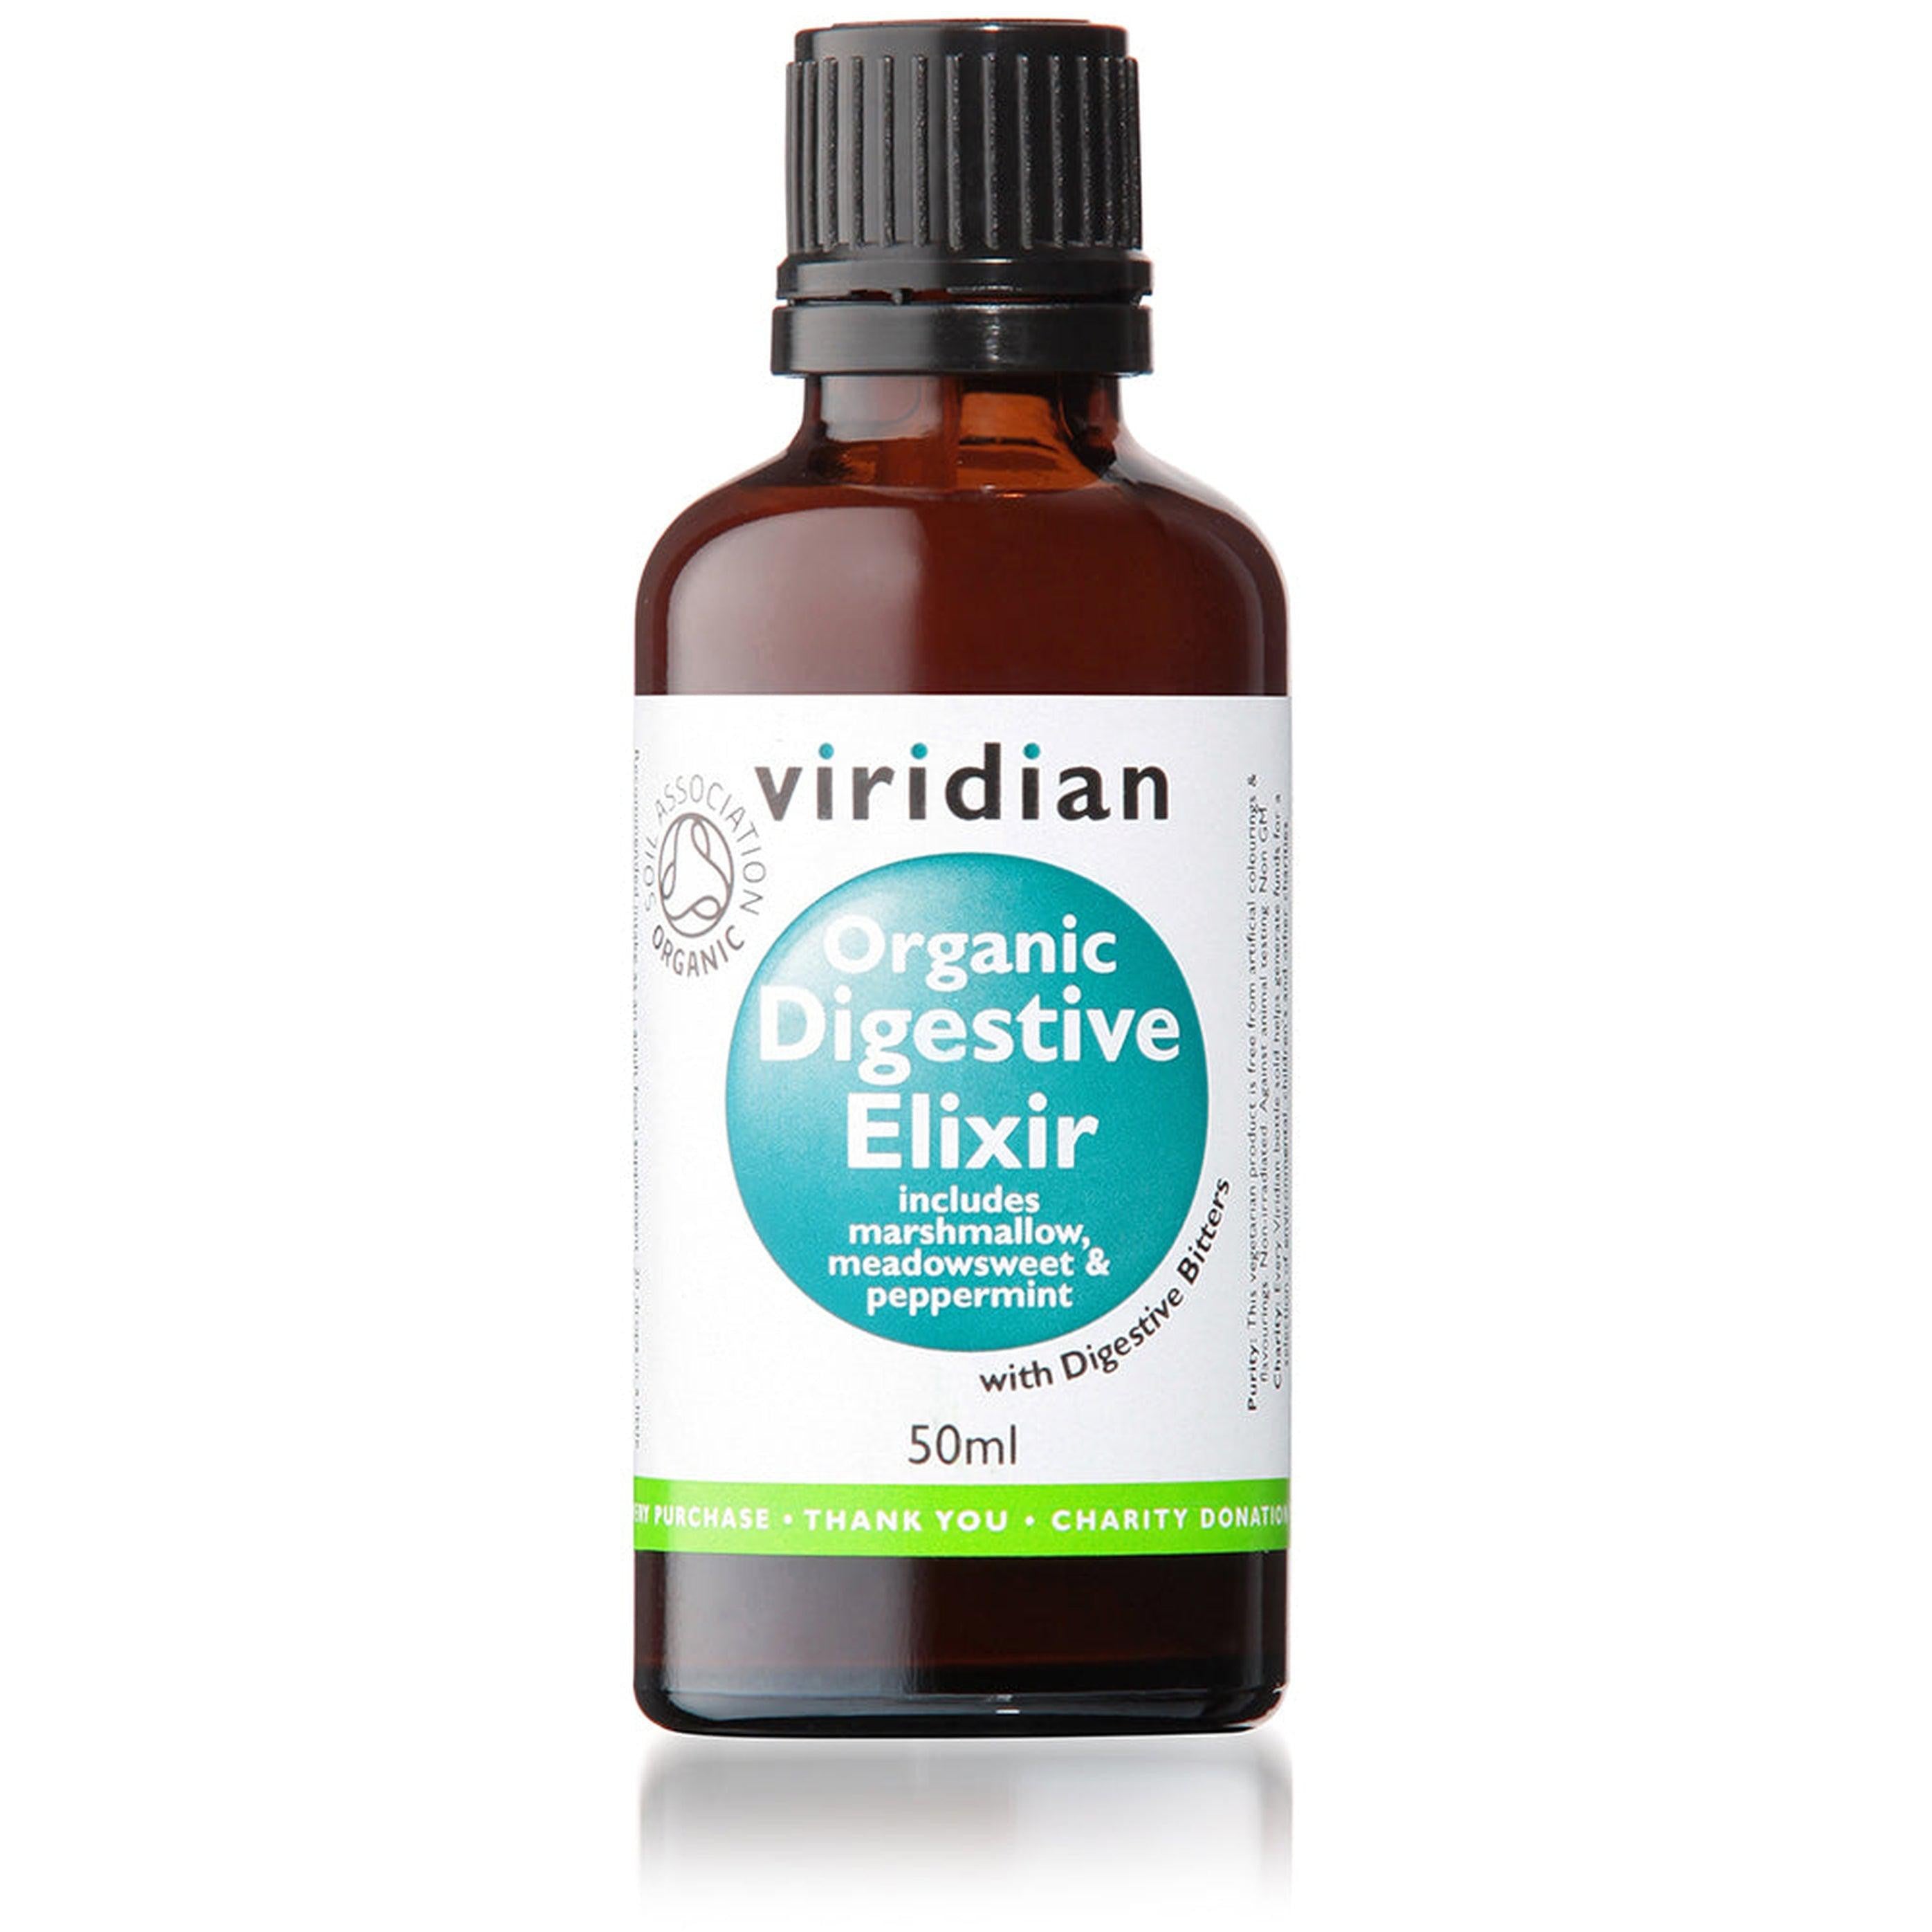 Viridian Organic Digestive Elixir Tincture 50ml- Lillys Pharmacy and Health Store